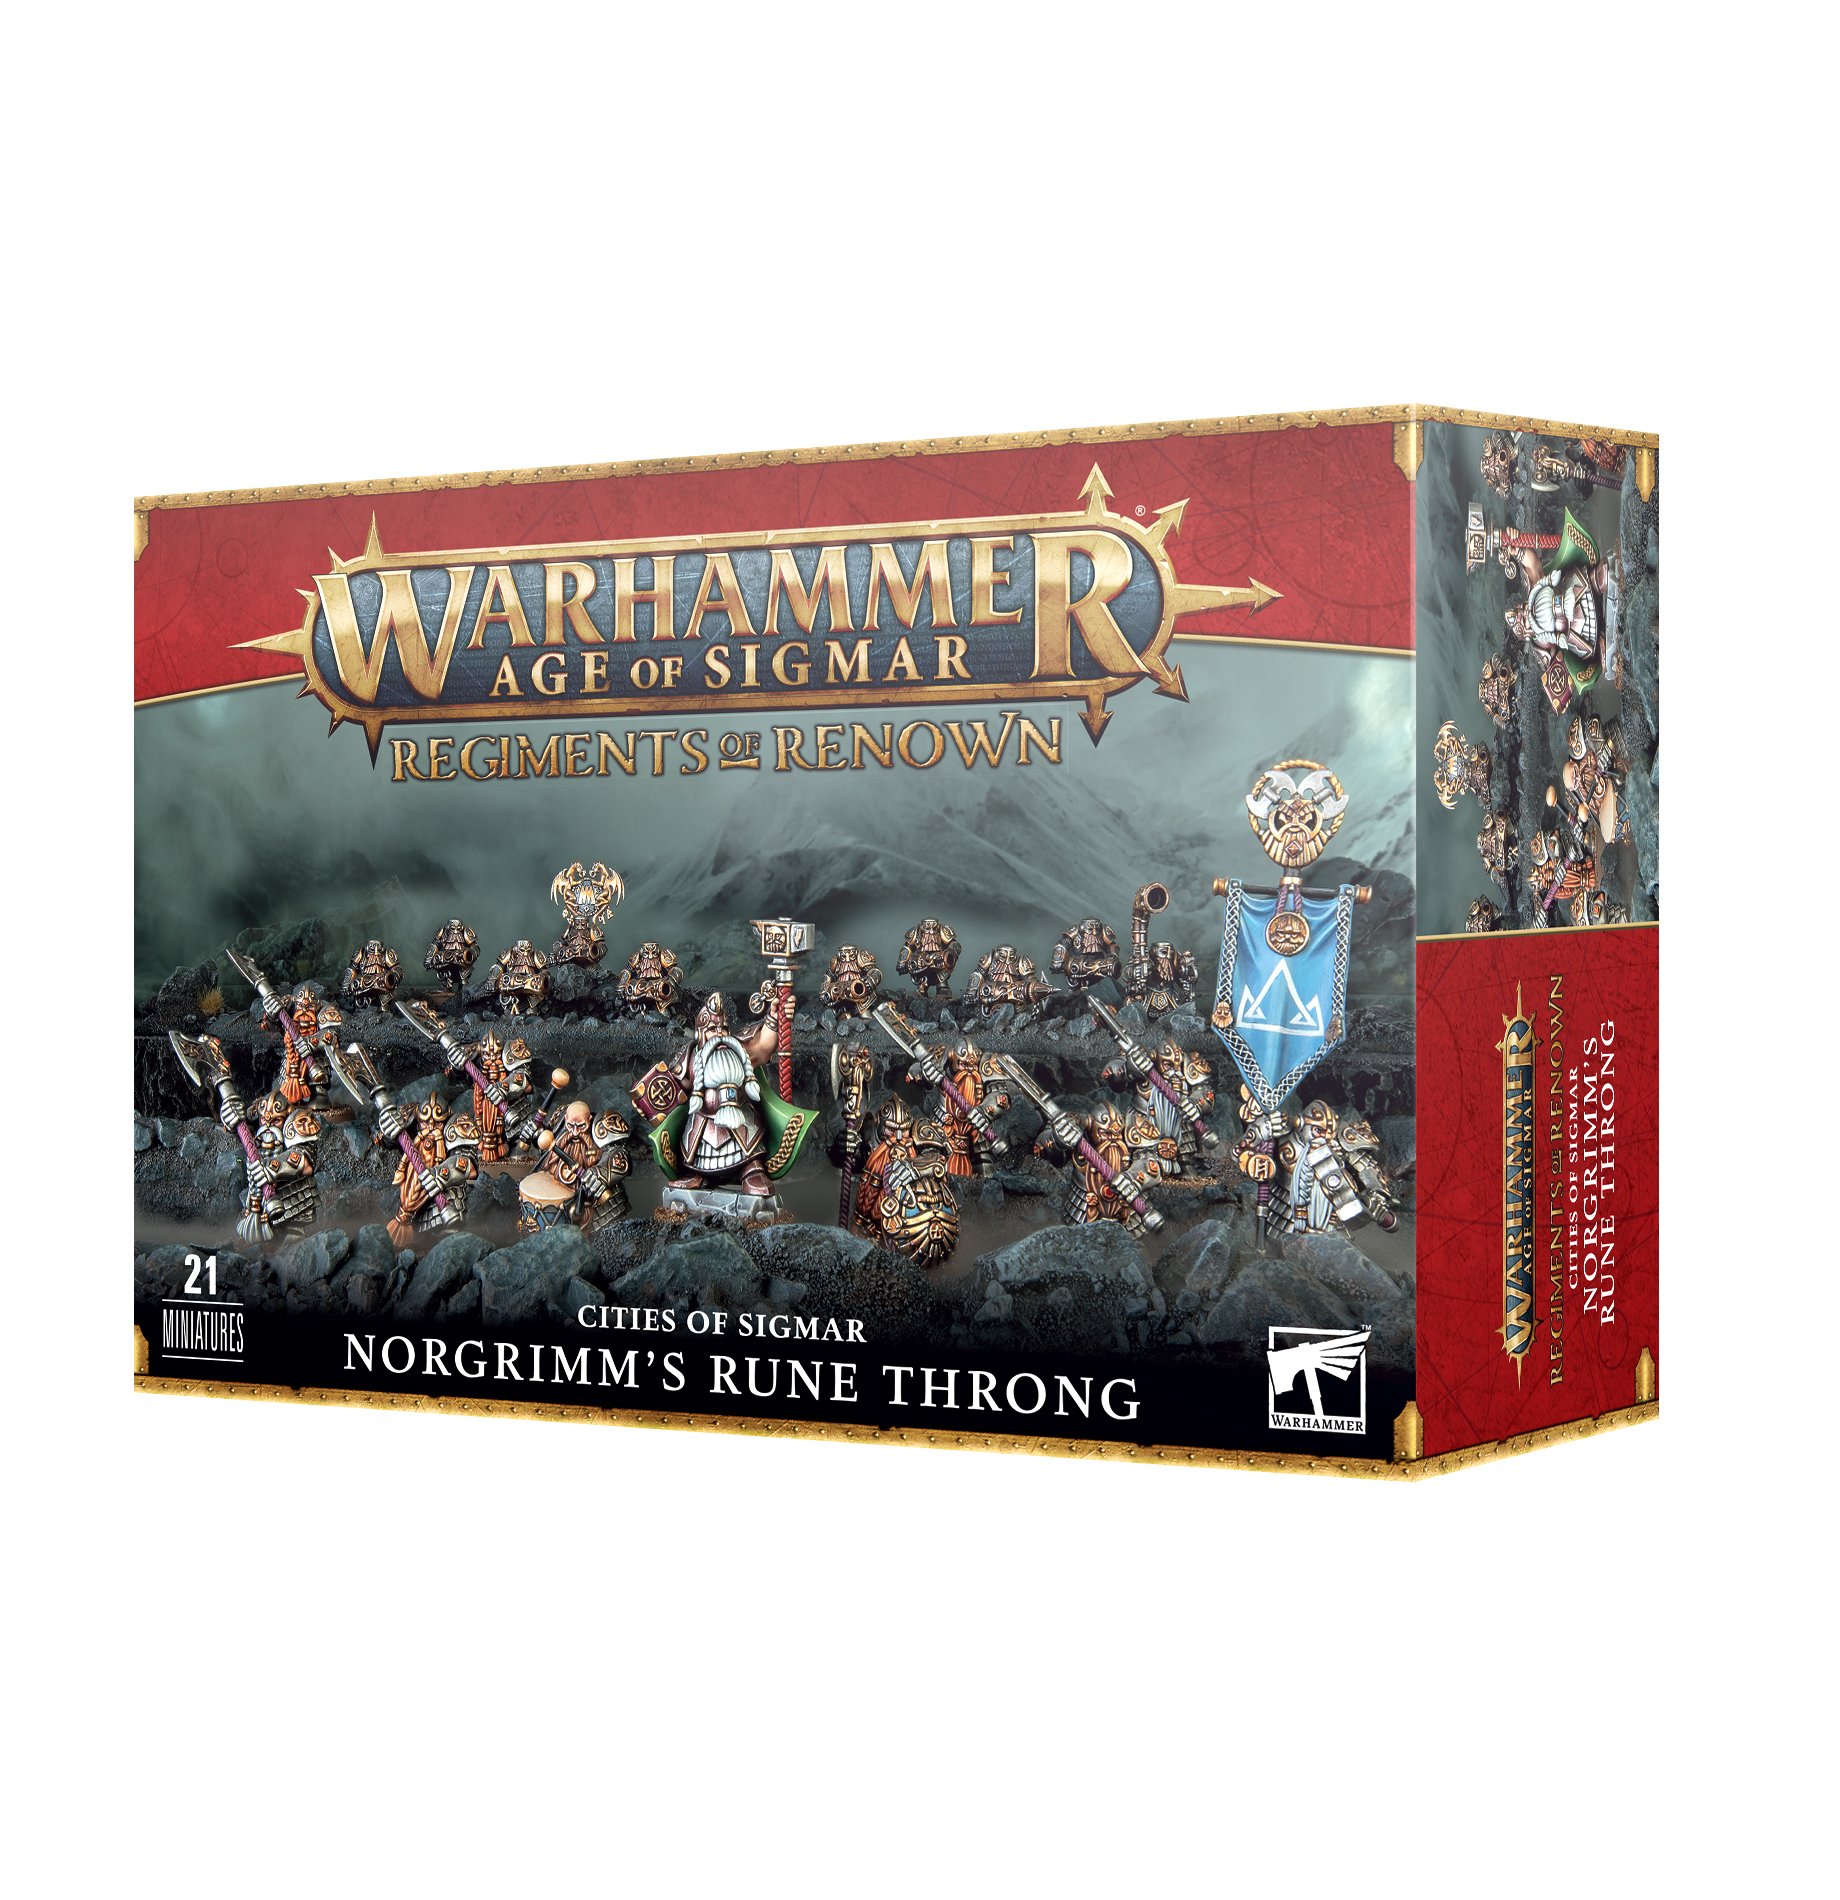 Warhammer Age of Sigmar: Cities of Sigmar: Norgrimms Rune Throng 